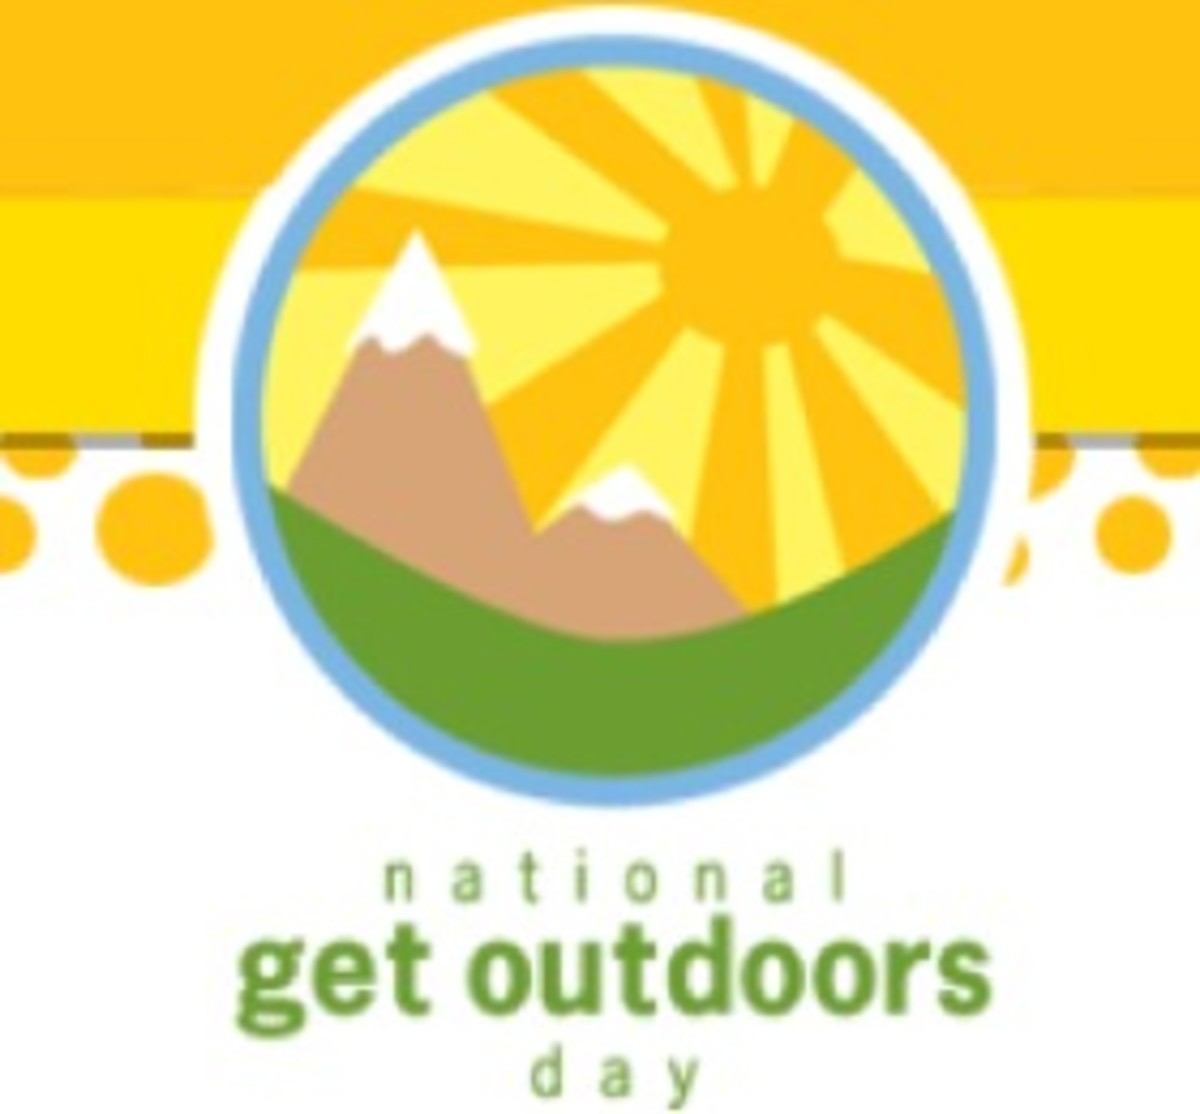 Get Outdoors Day